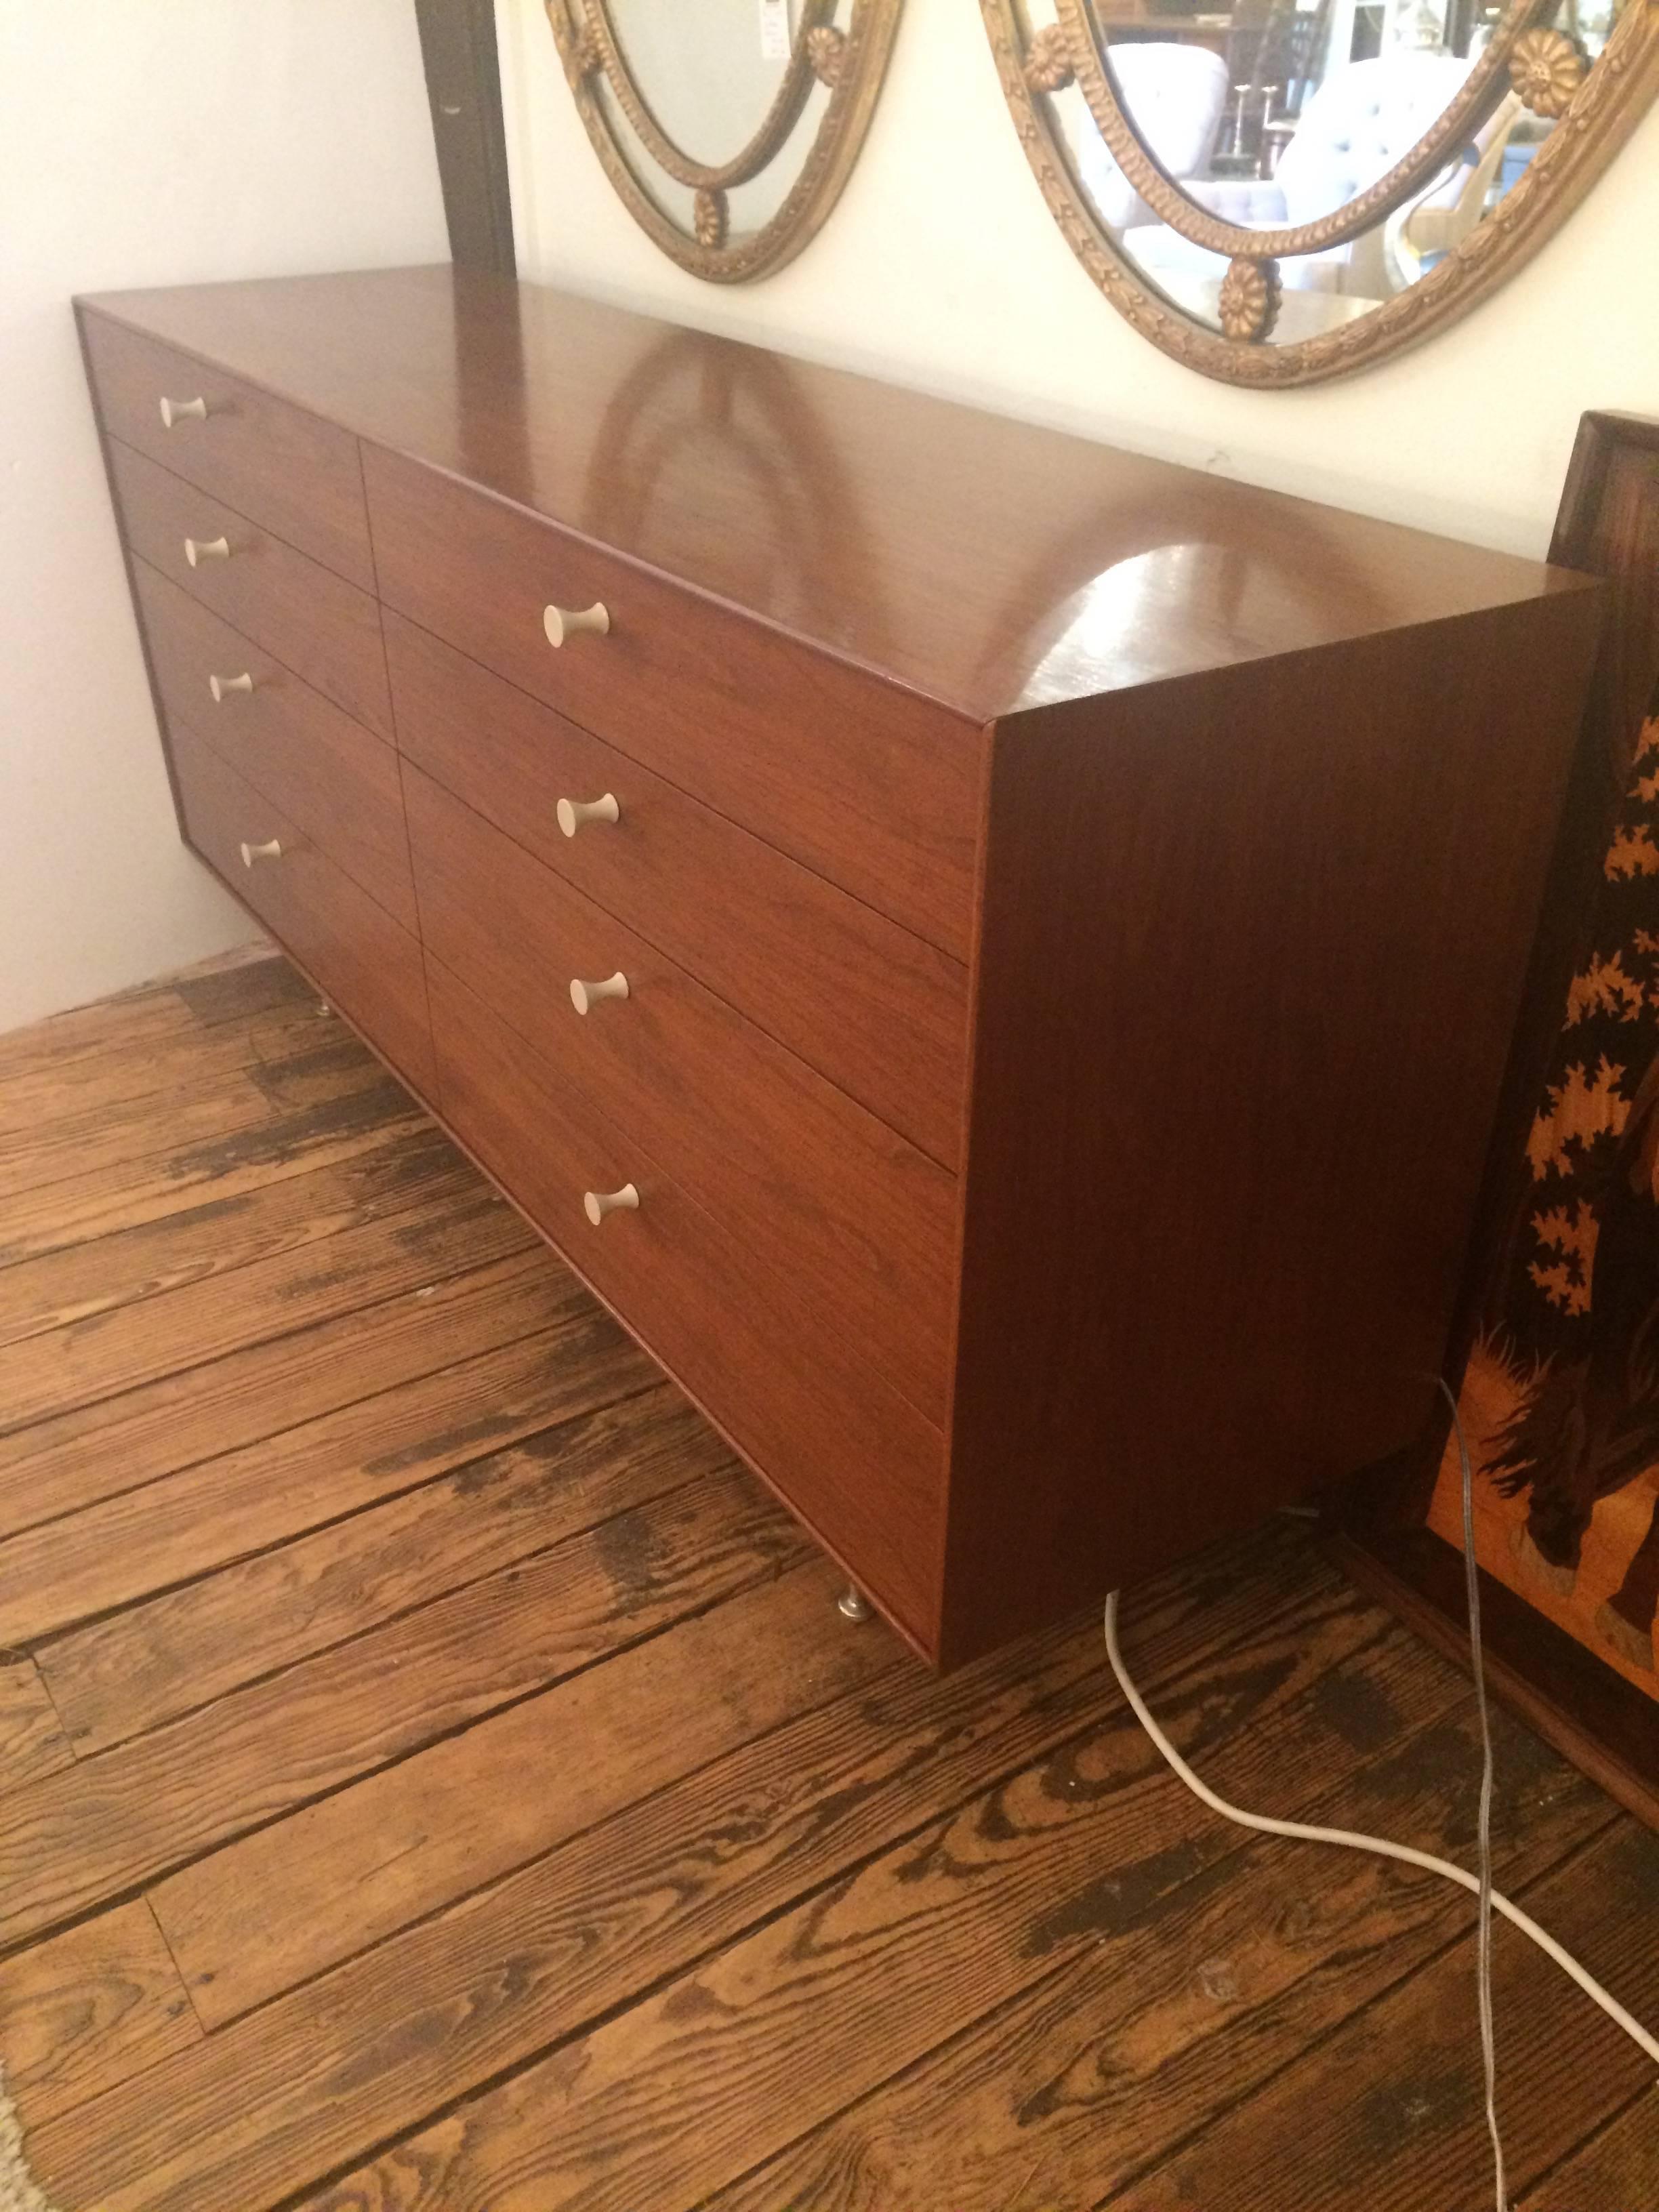 Superb sleek Mid-Century Modern design by the iconic George Nelson for Herman Miller, thin edge walnut veneer very large eight-drawer dresser with tapered aluminium legs and classy white hour-glass shaped hardware.